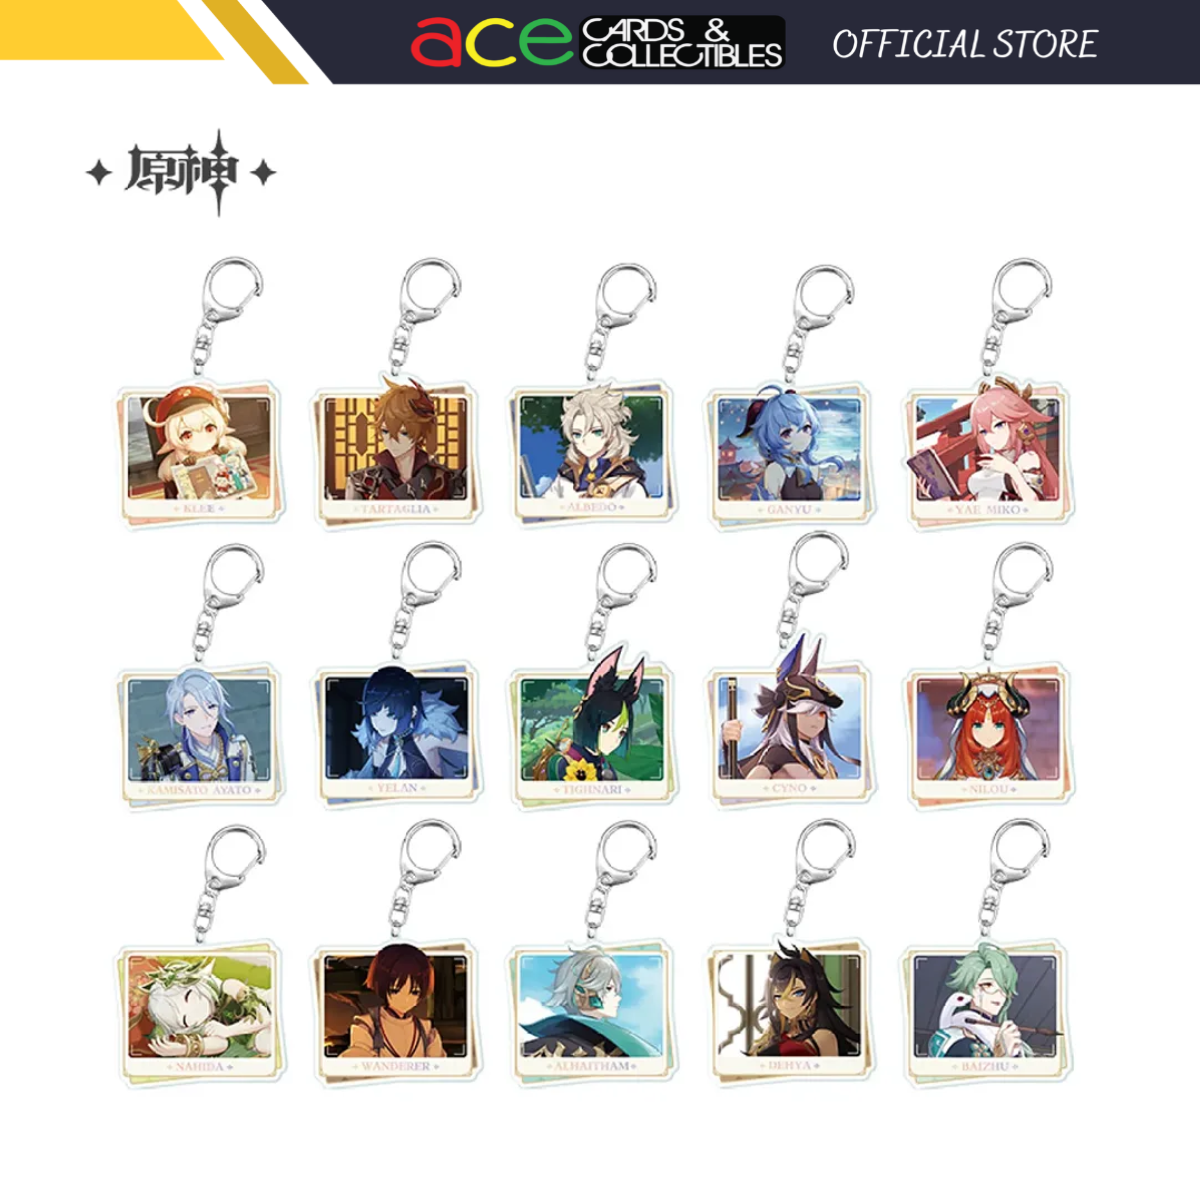 miHoYo Genshin Impact Character PV Acrylic Keychain-Klee-miHoYo-Ace Cards & Collectibles